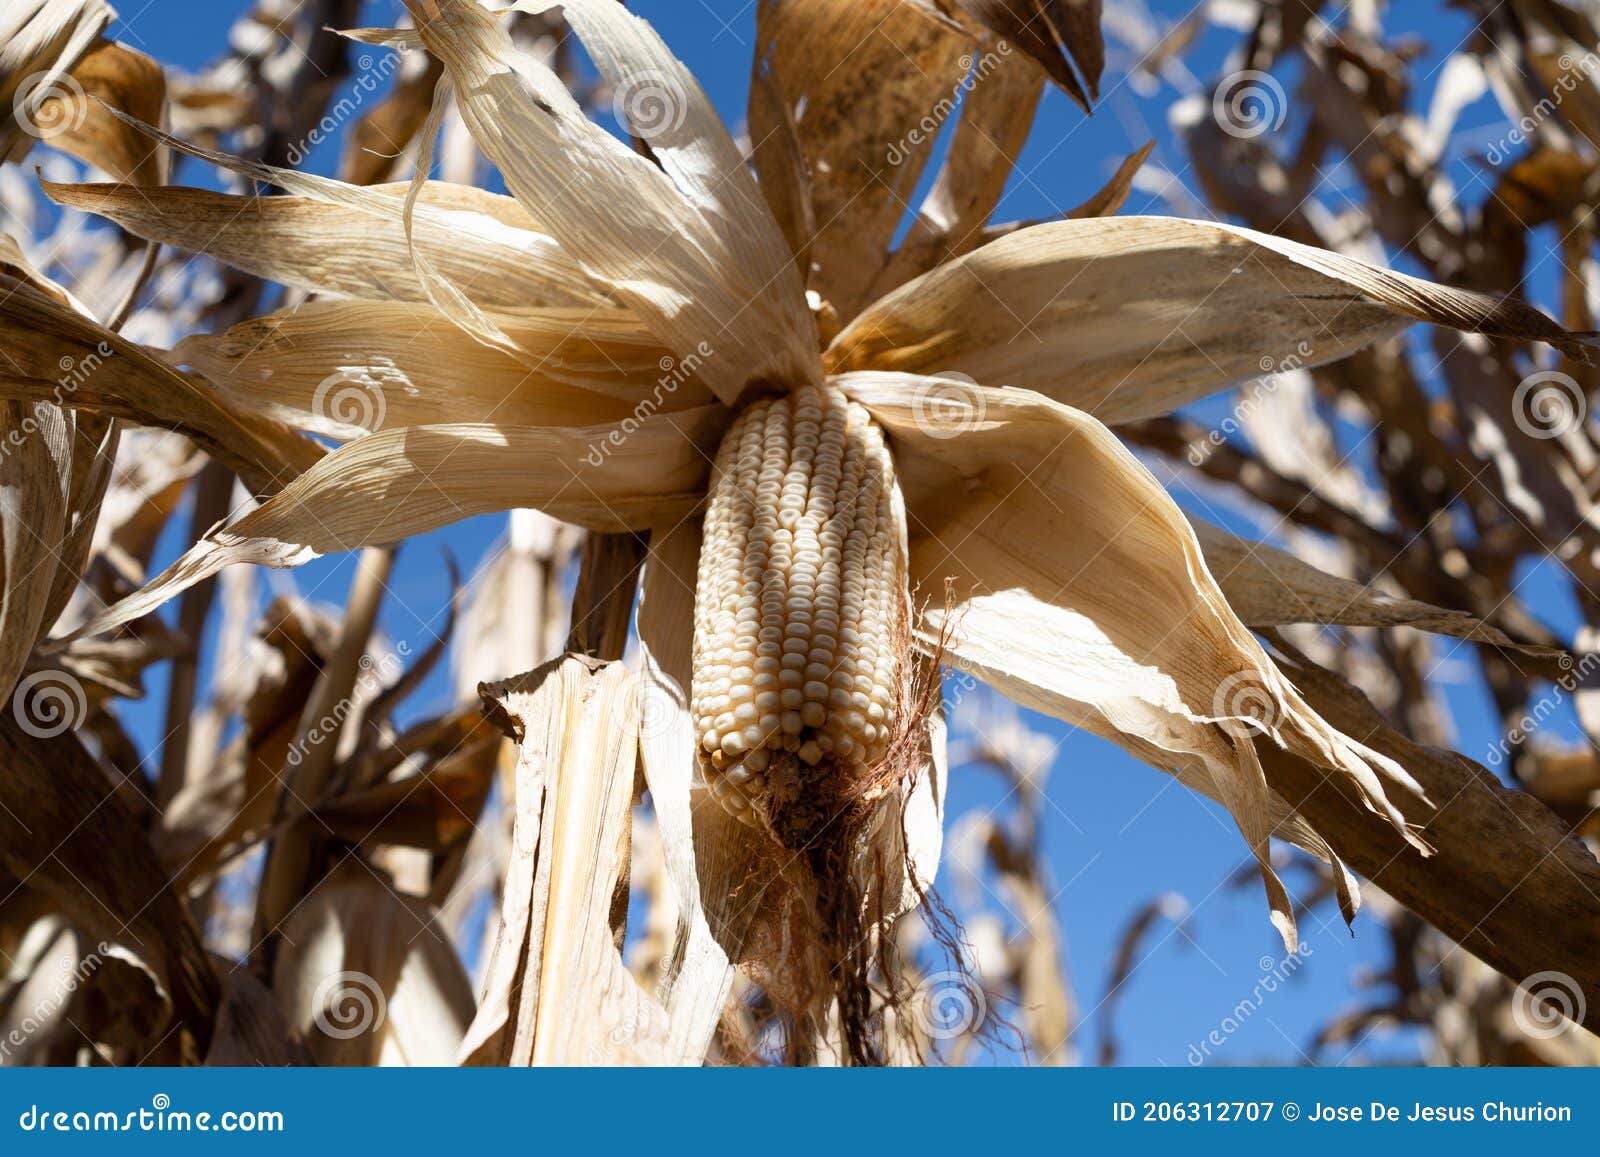 the corn is open and hanging on its dry plant.